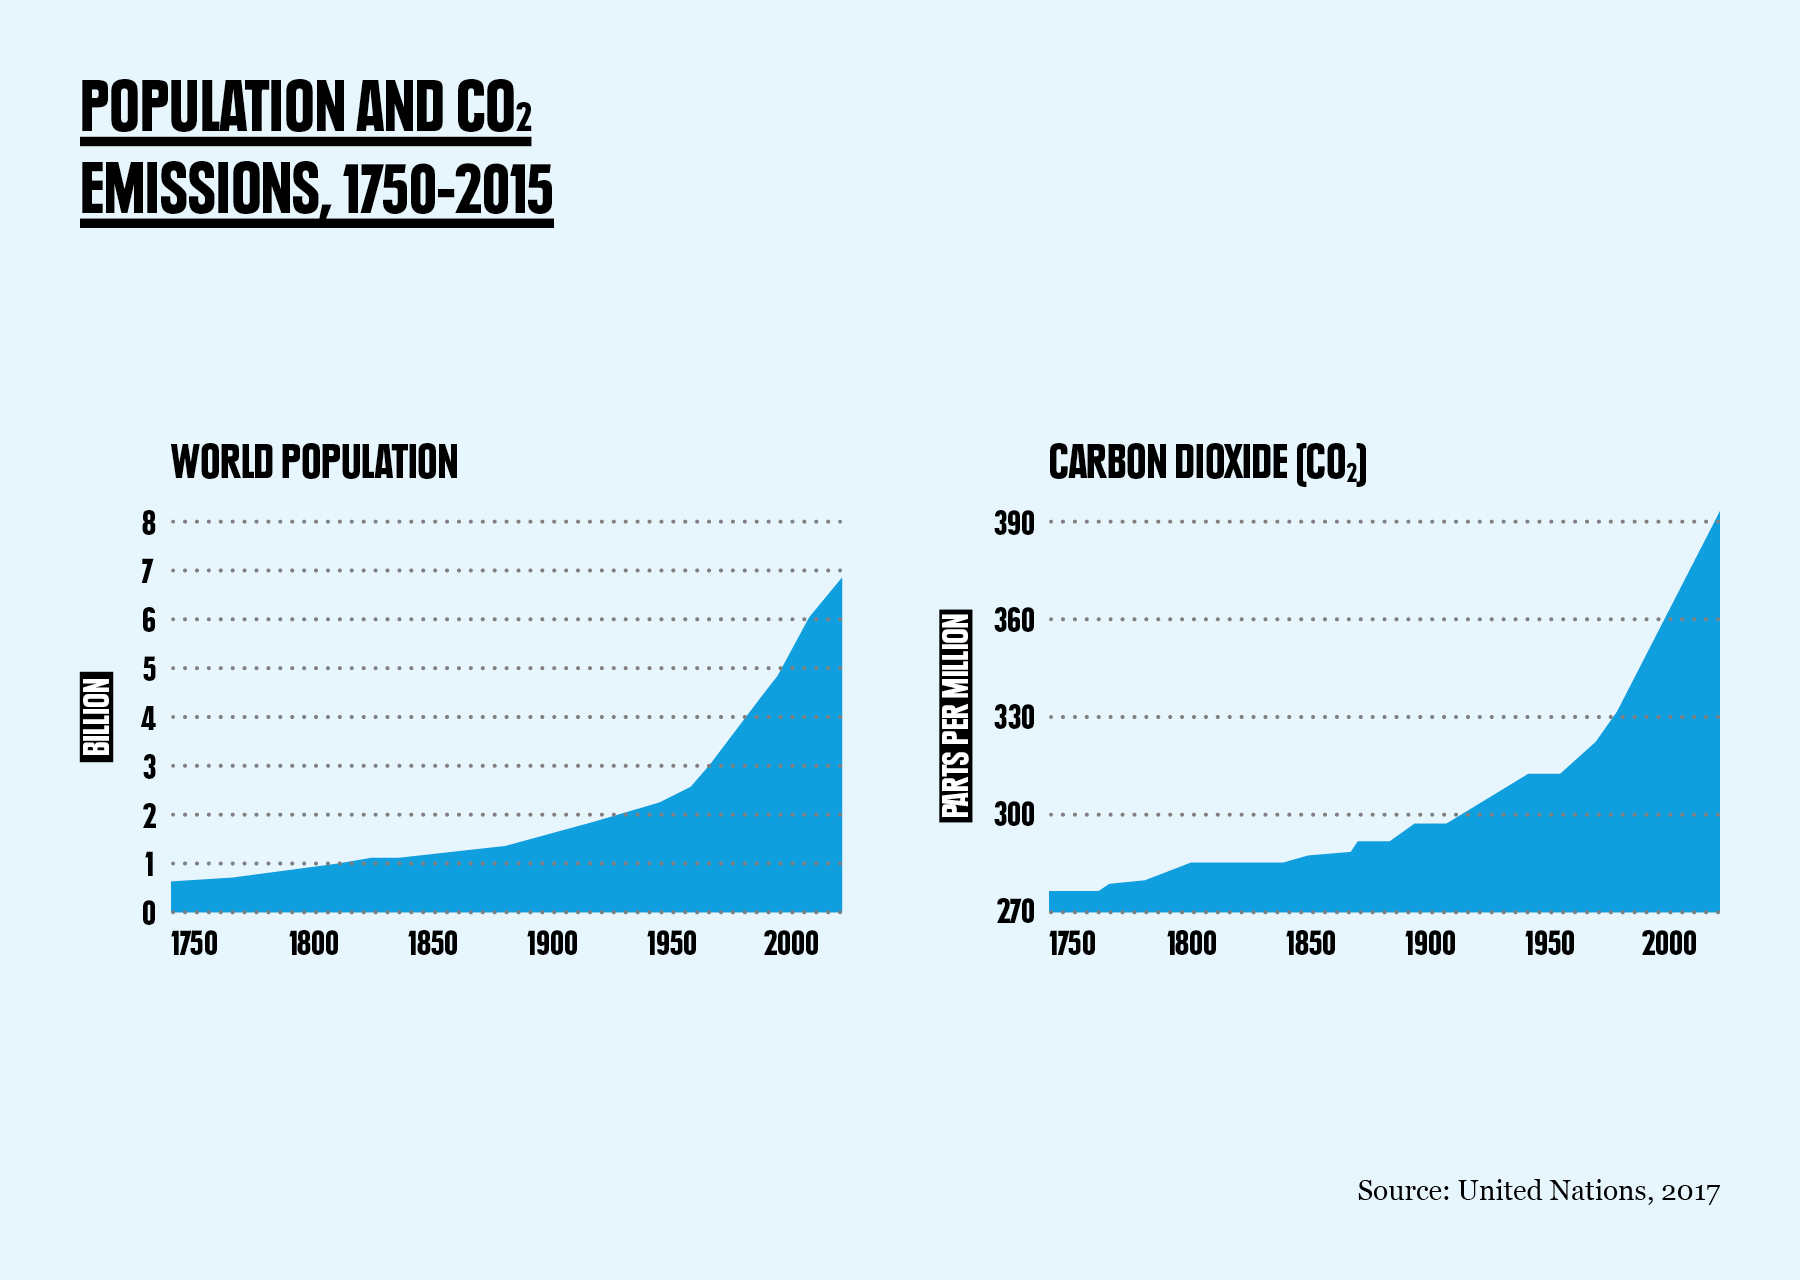 Population and CO2 emissions